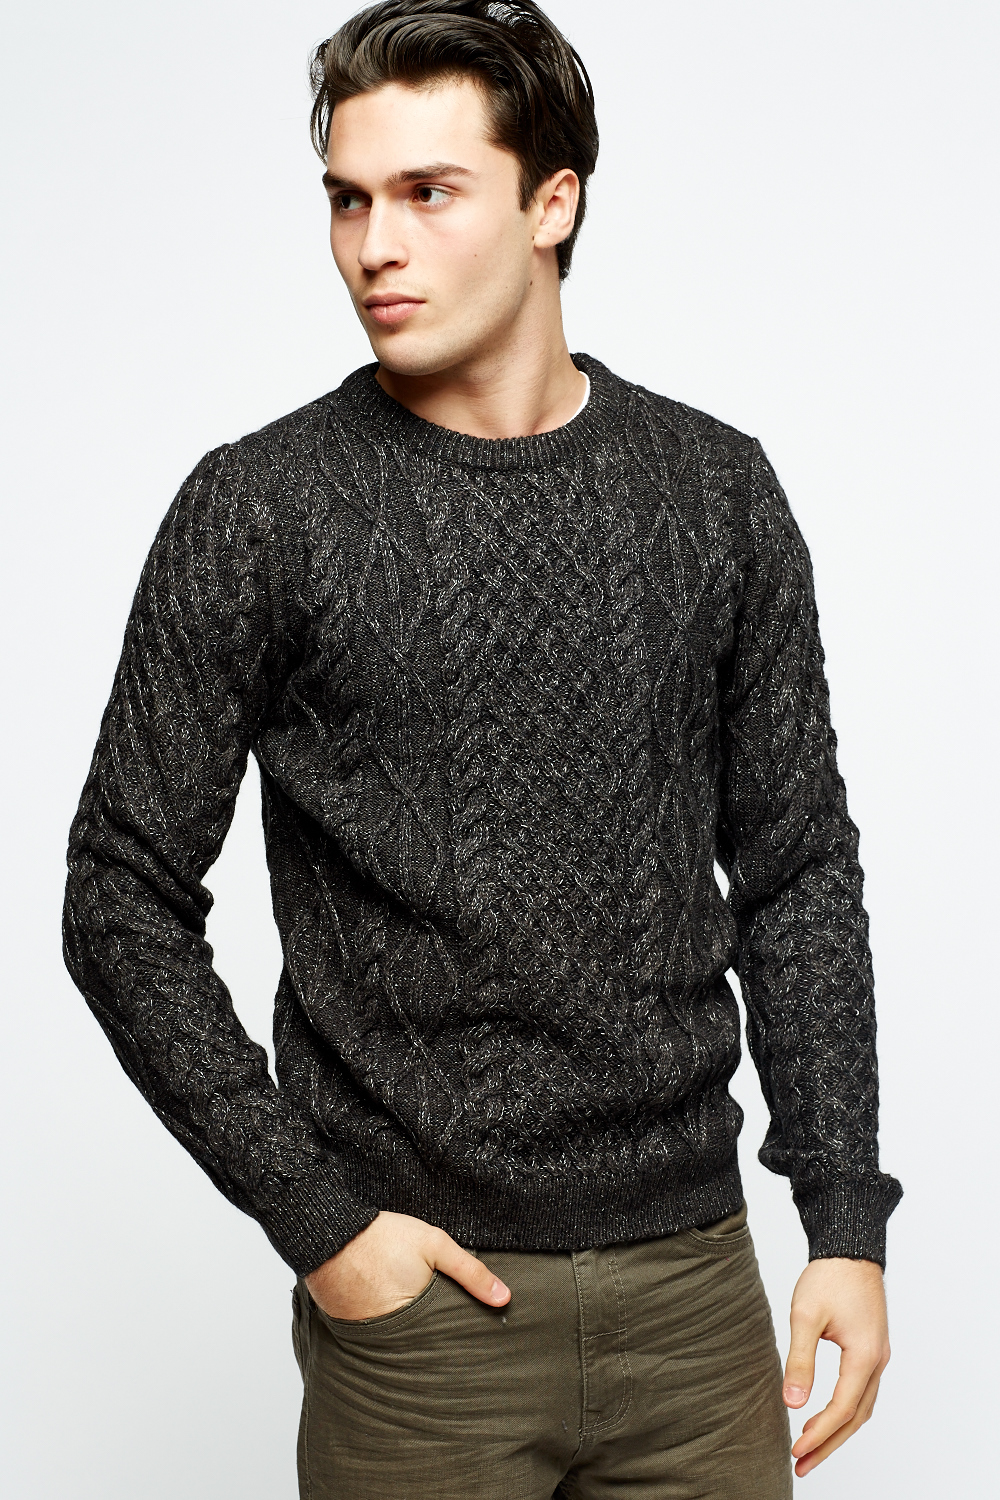 Cable Knit Mens Jumper - Just $6